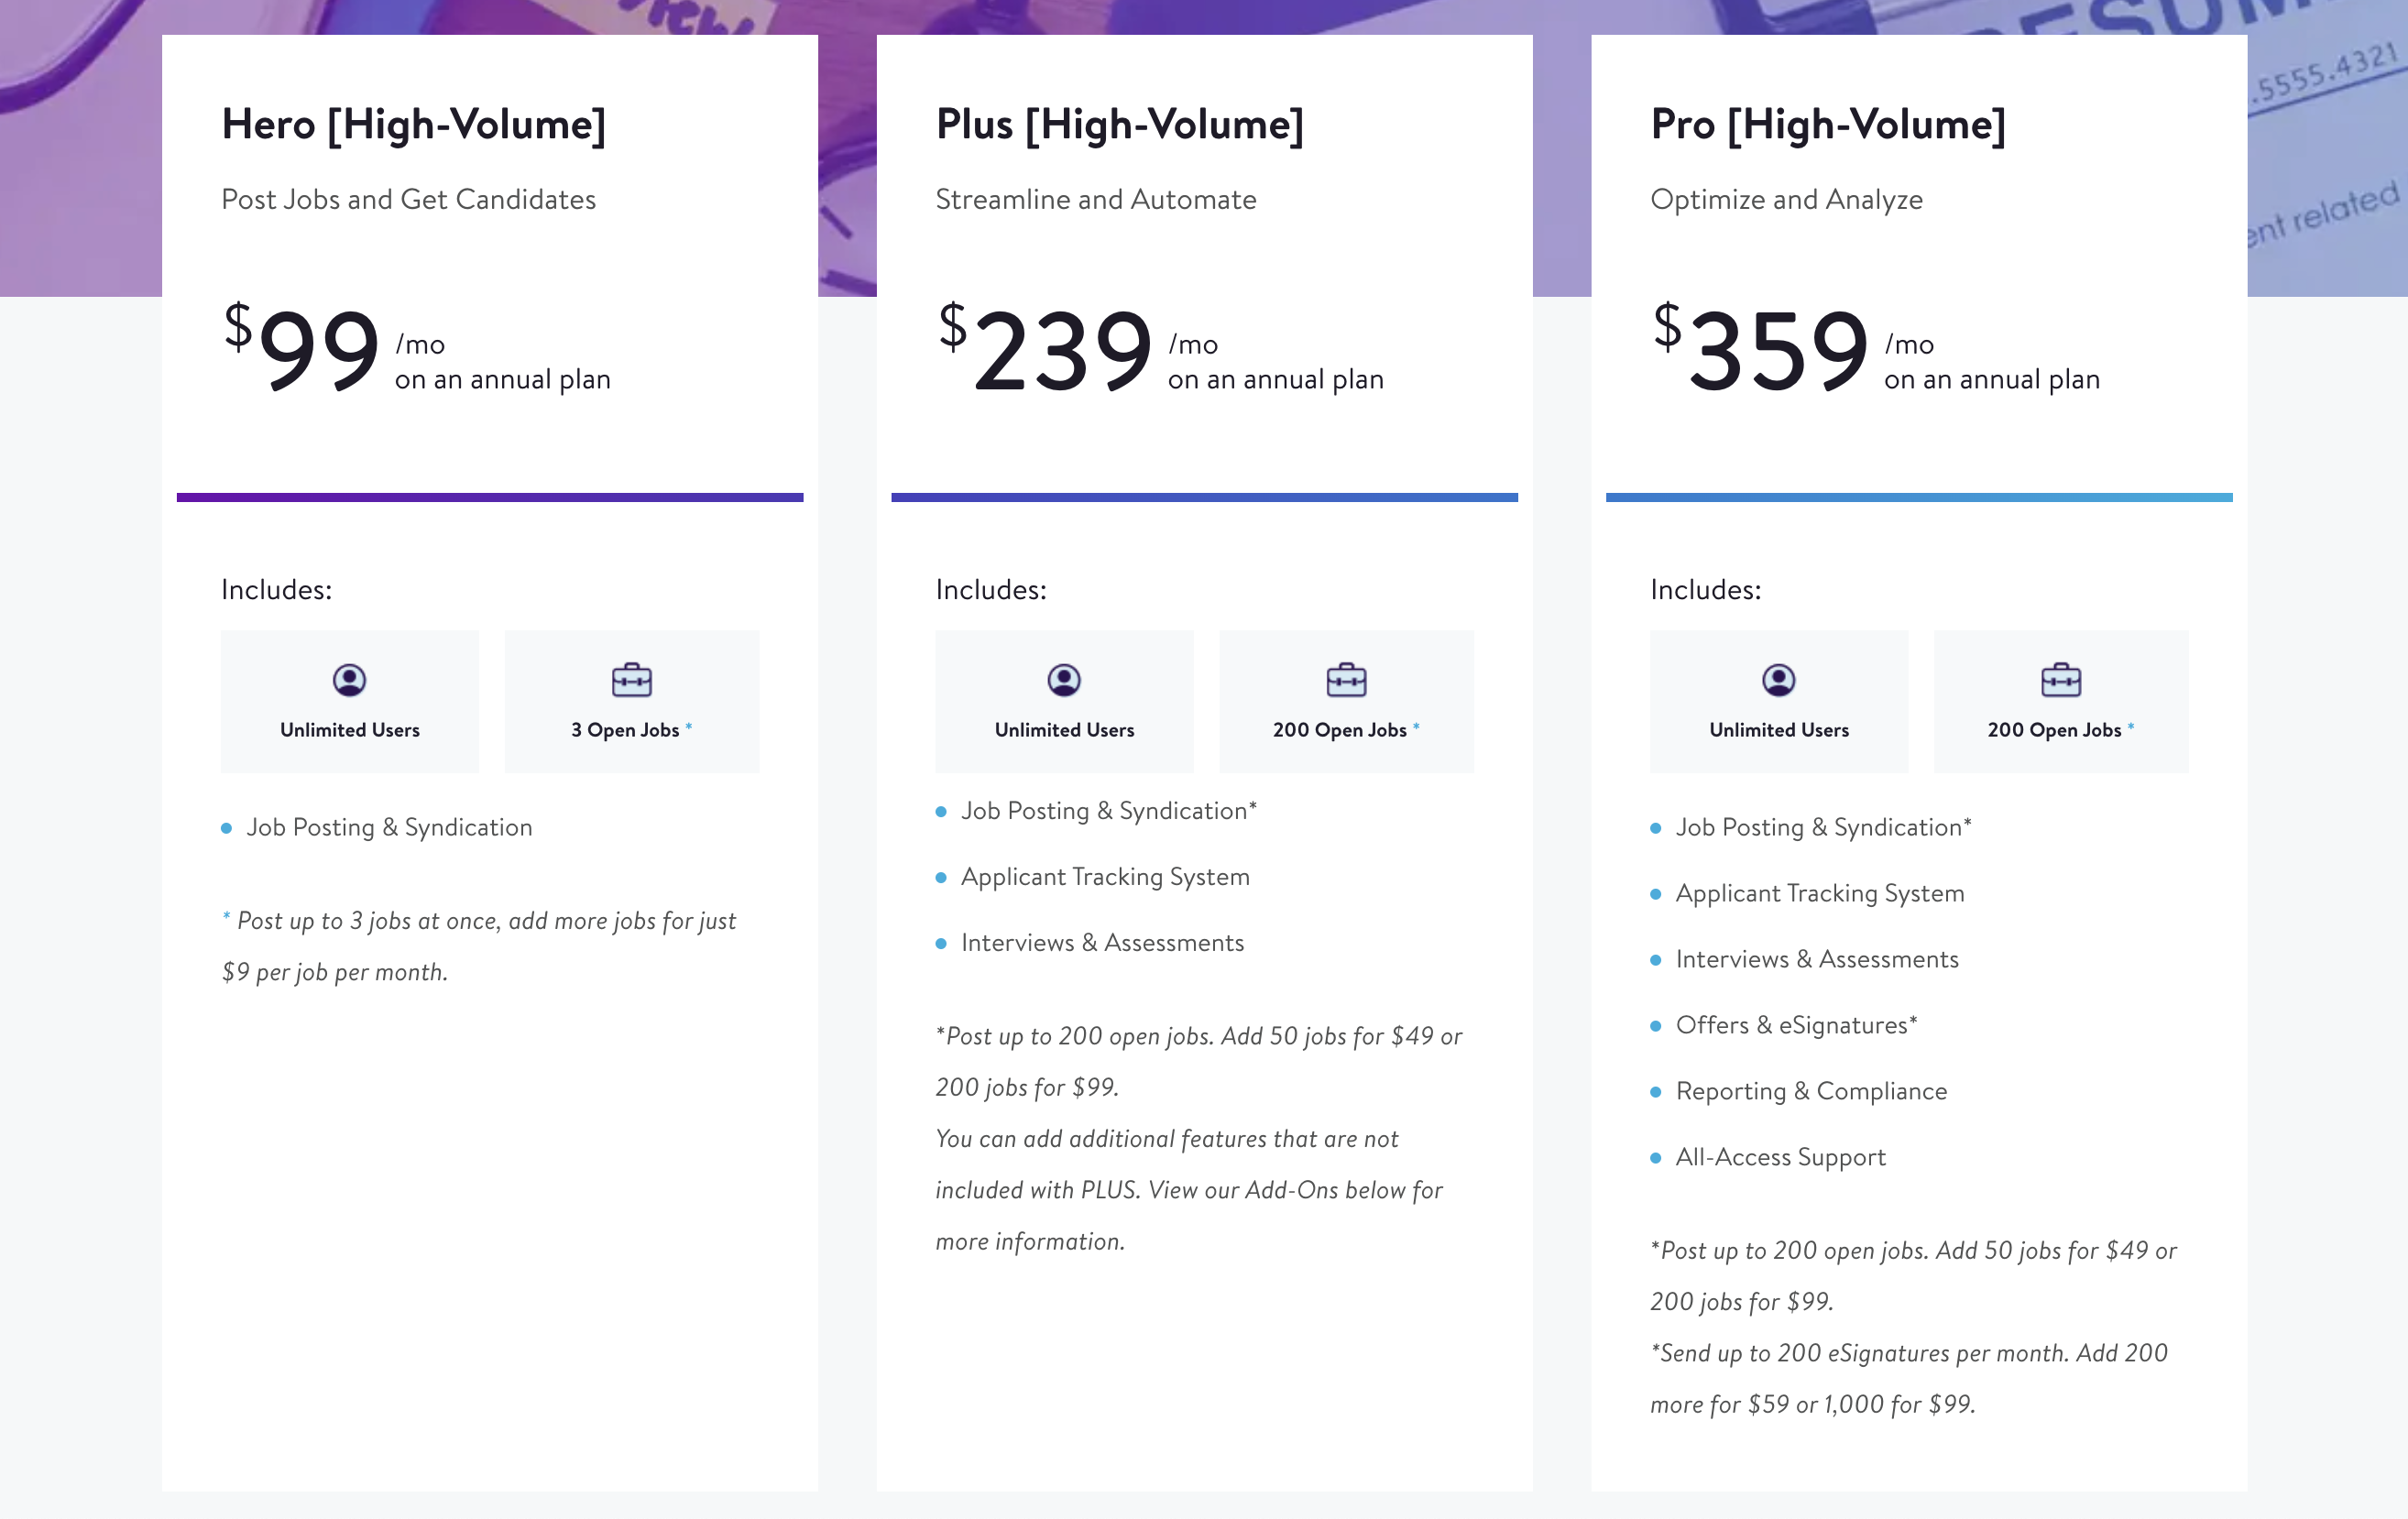 JazzHR high-volume plans and pricing overview